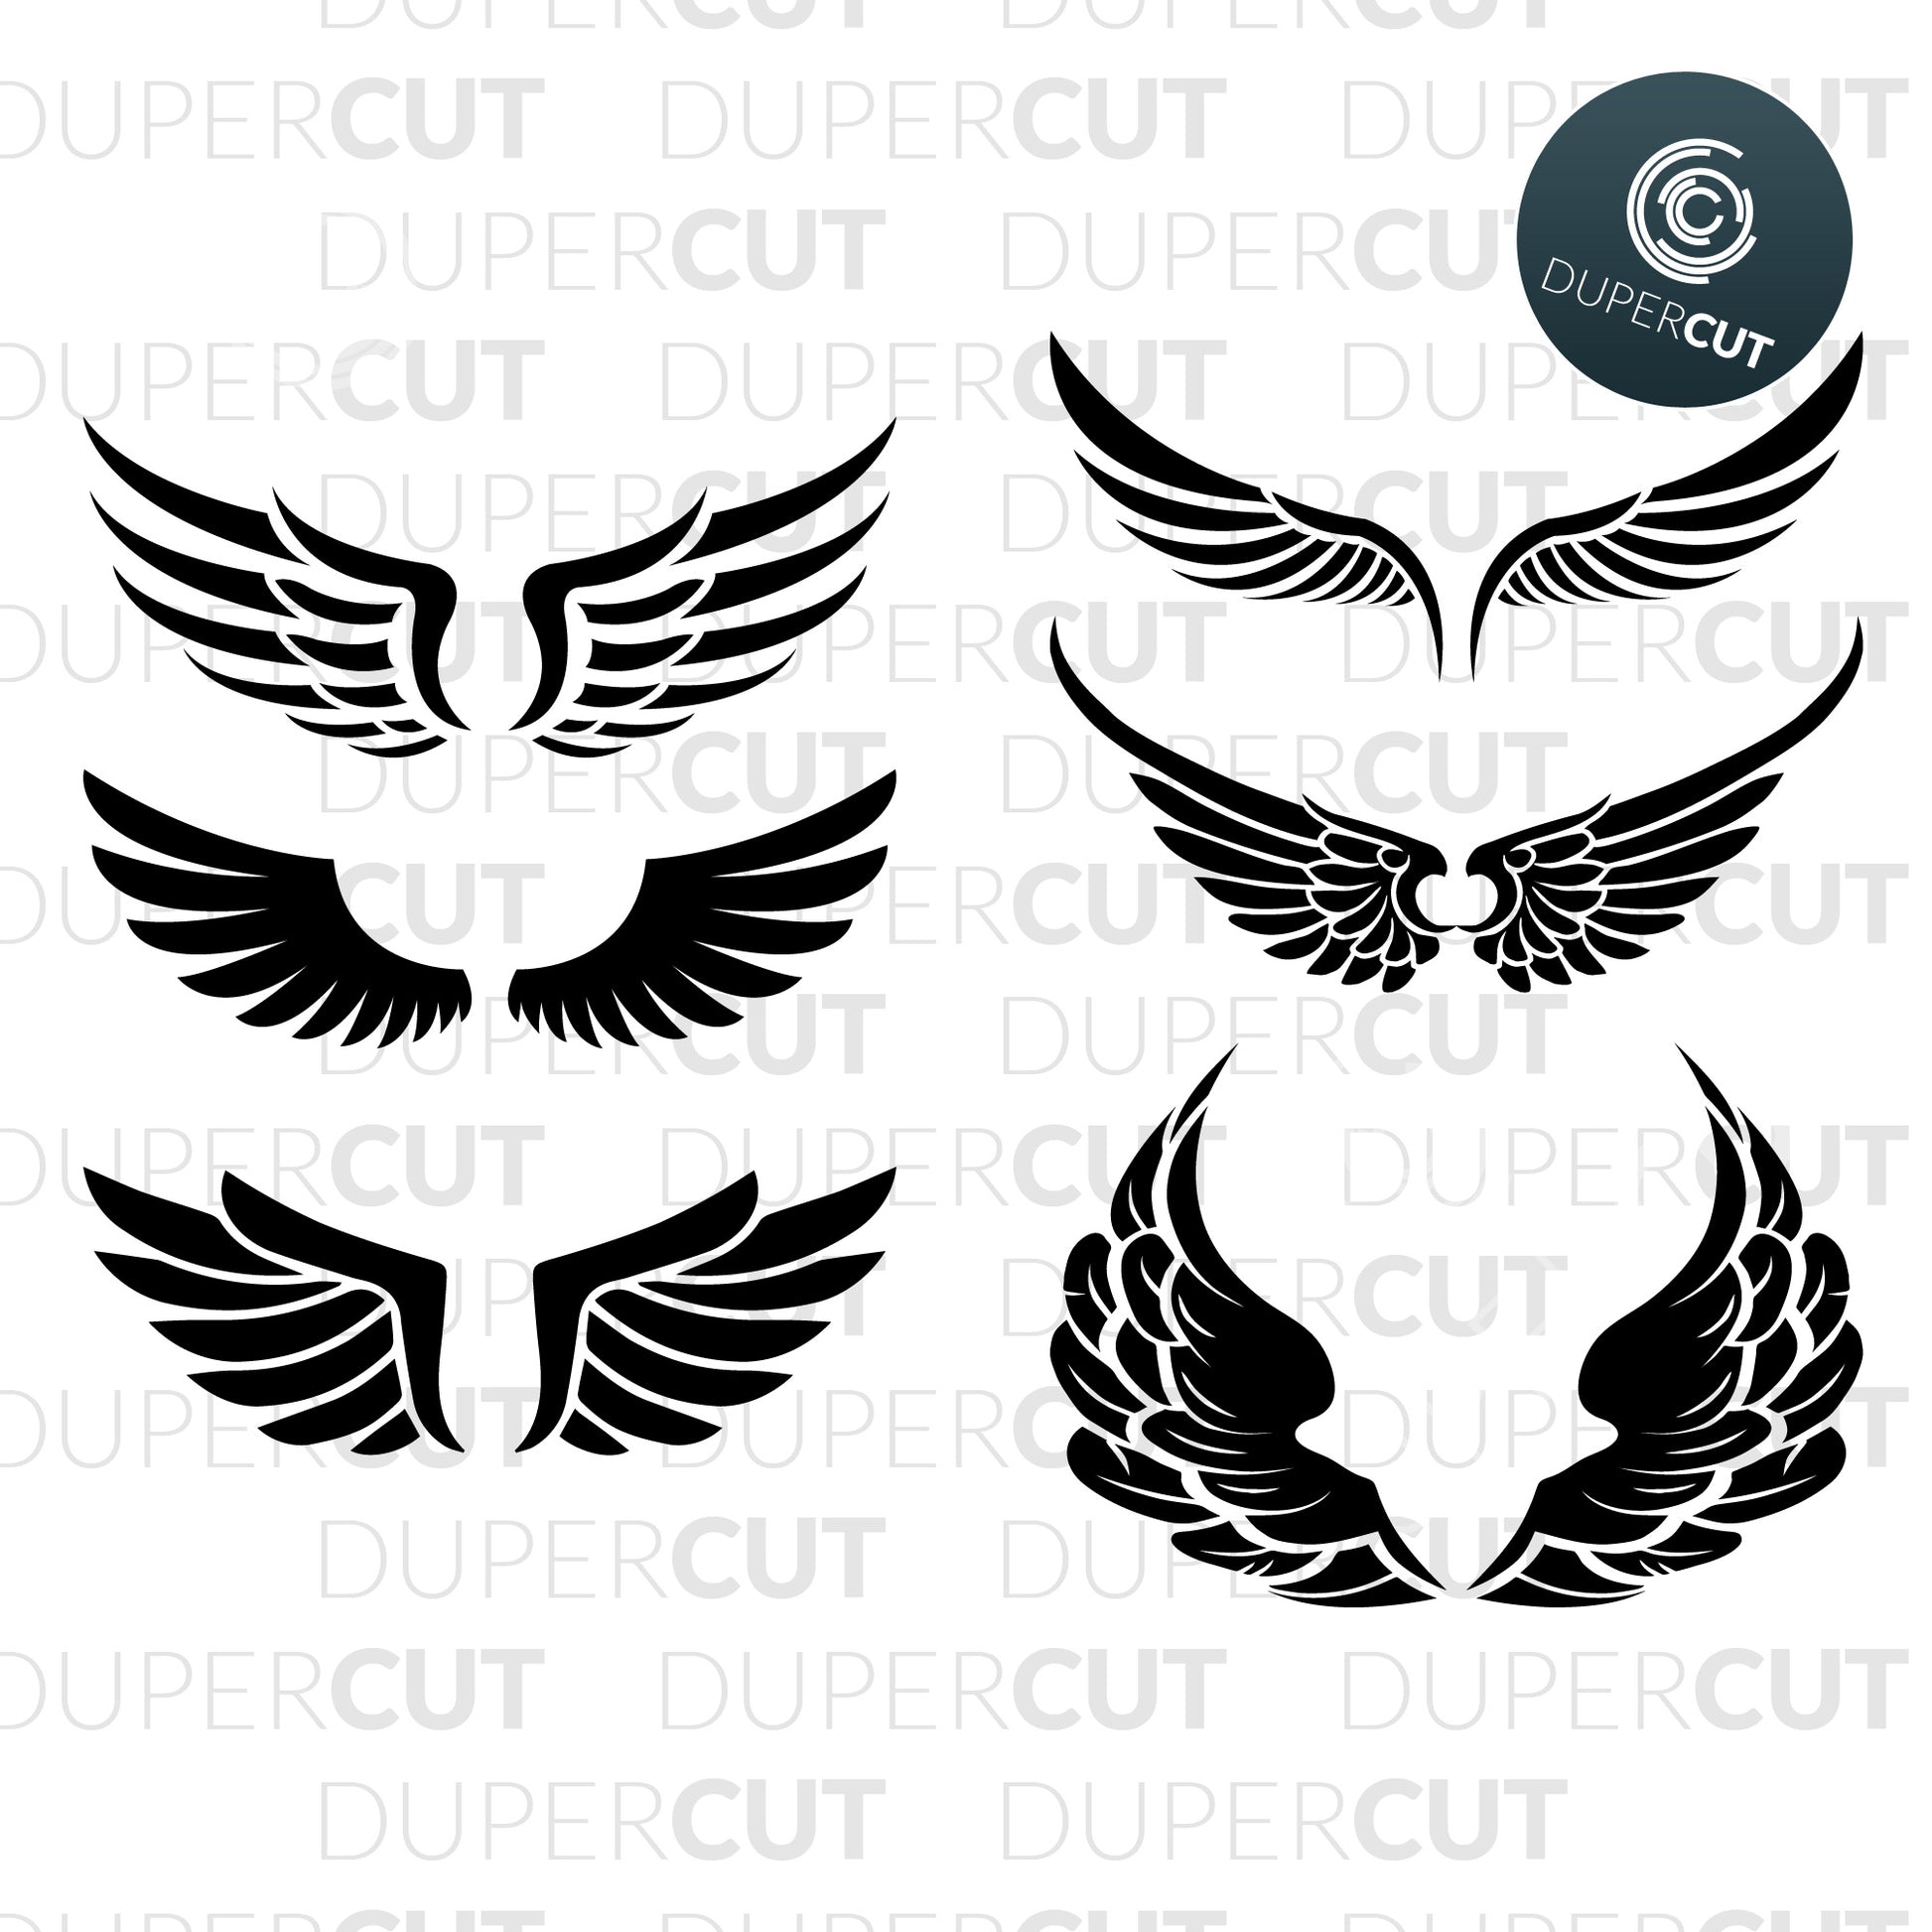 FREE wings bundle silhouettes. Paper cutting template SVG PNG DXF files. For DIY projects Cricut, Glowforge, Silhouette Cameo, CNC Machines.